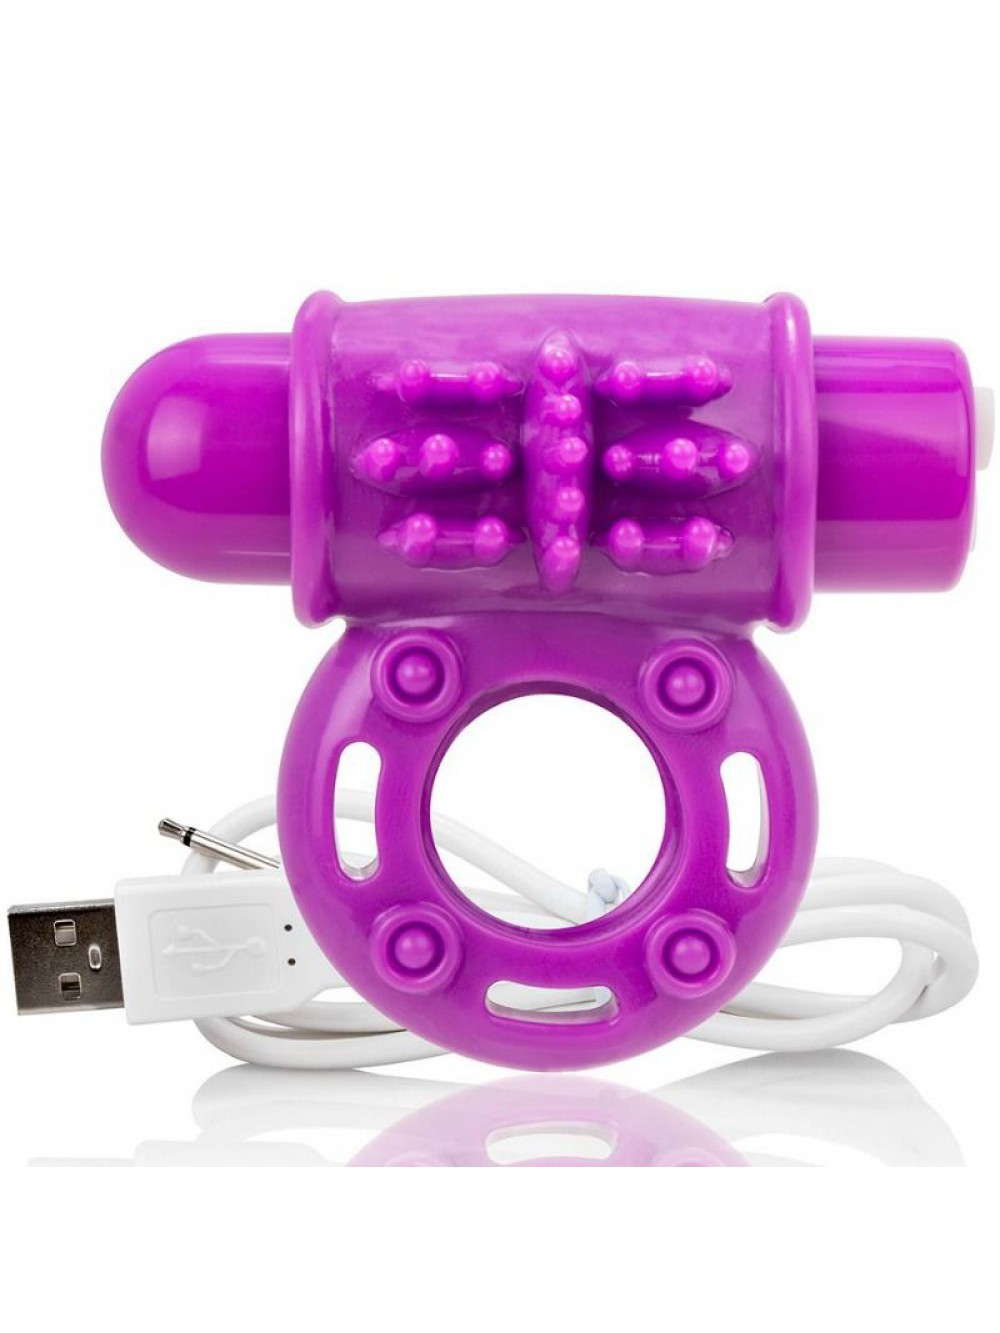 SCREAMING O VIBRATING RECHARGEABLE RING O WOW PURPLE